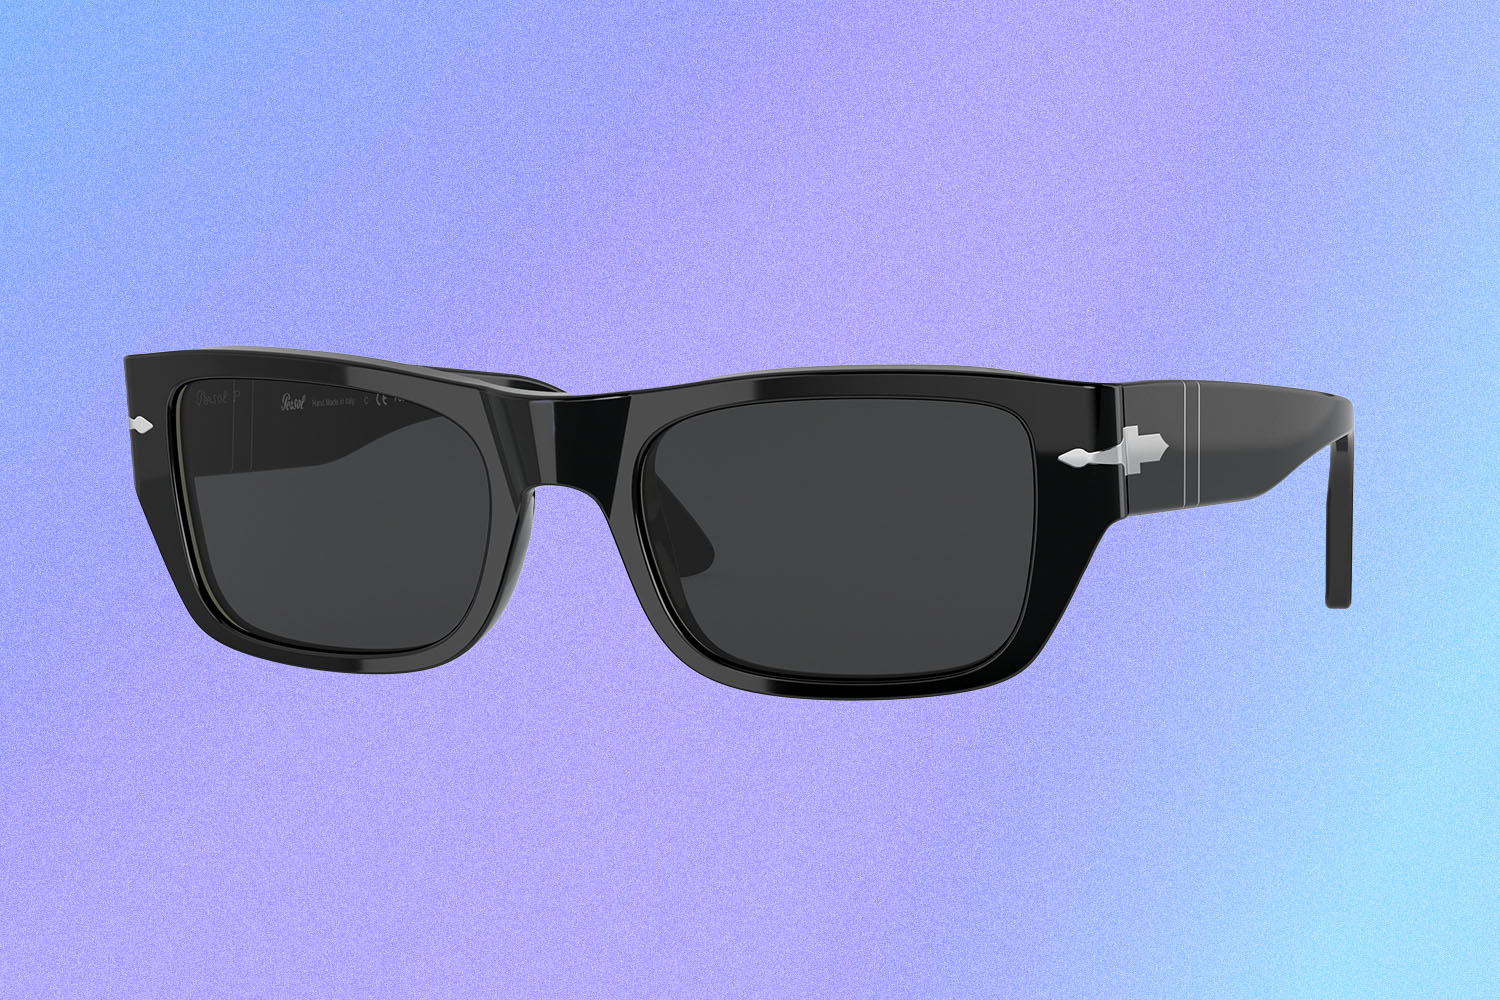 a pair of sunglasses seen in "The Batman" on a blue-purple background